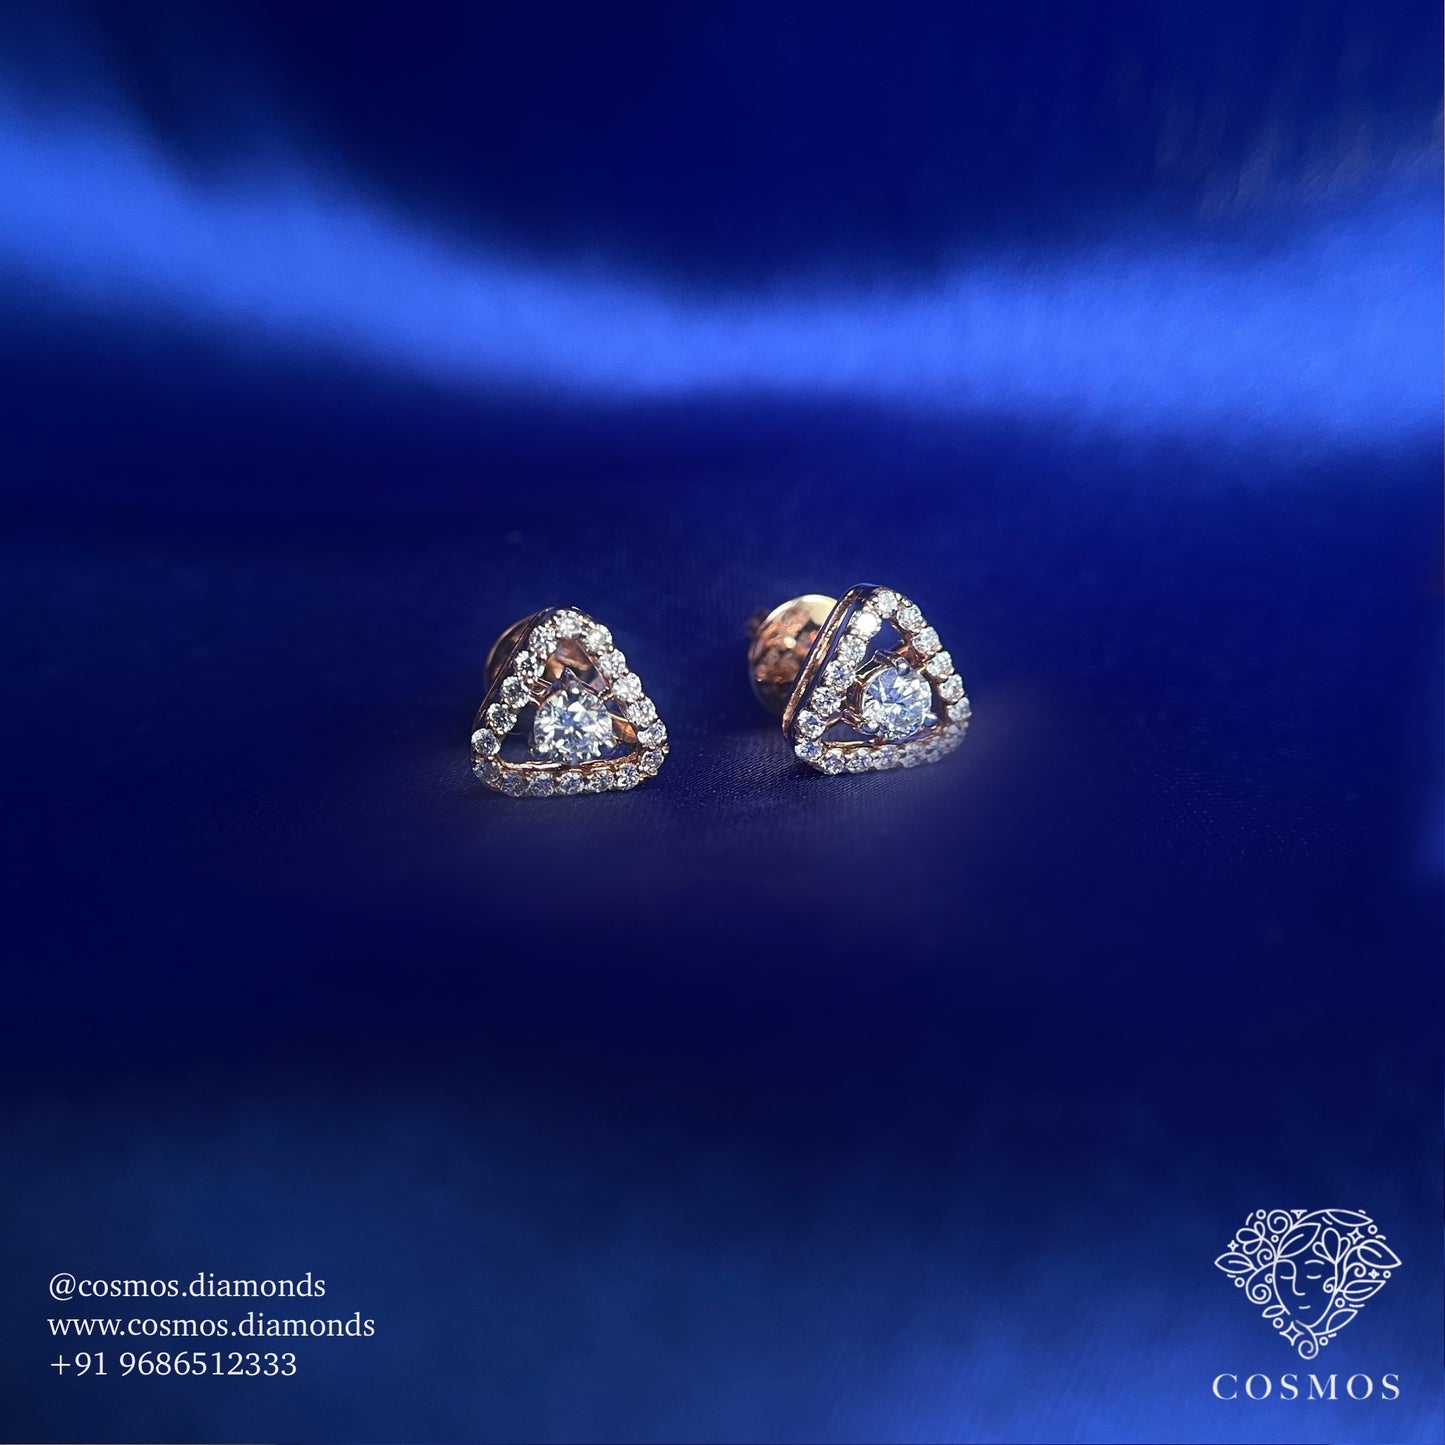 Trinity solitaire studs